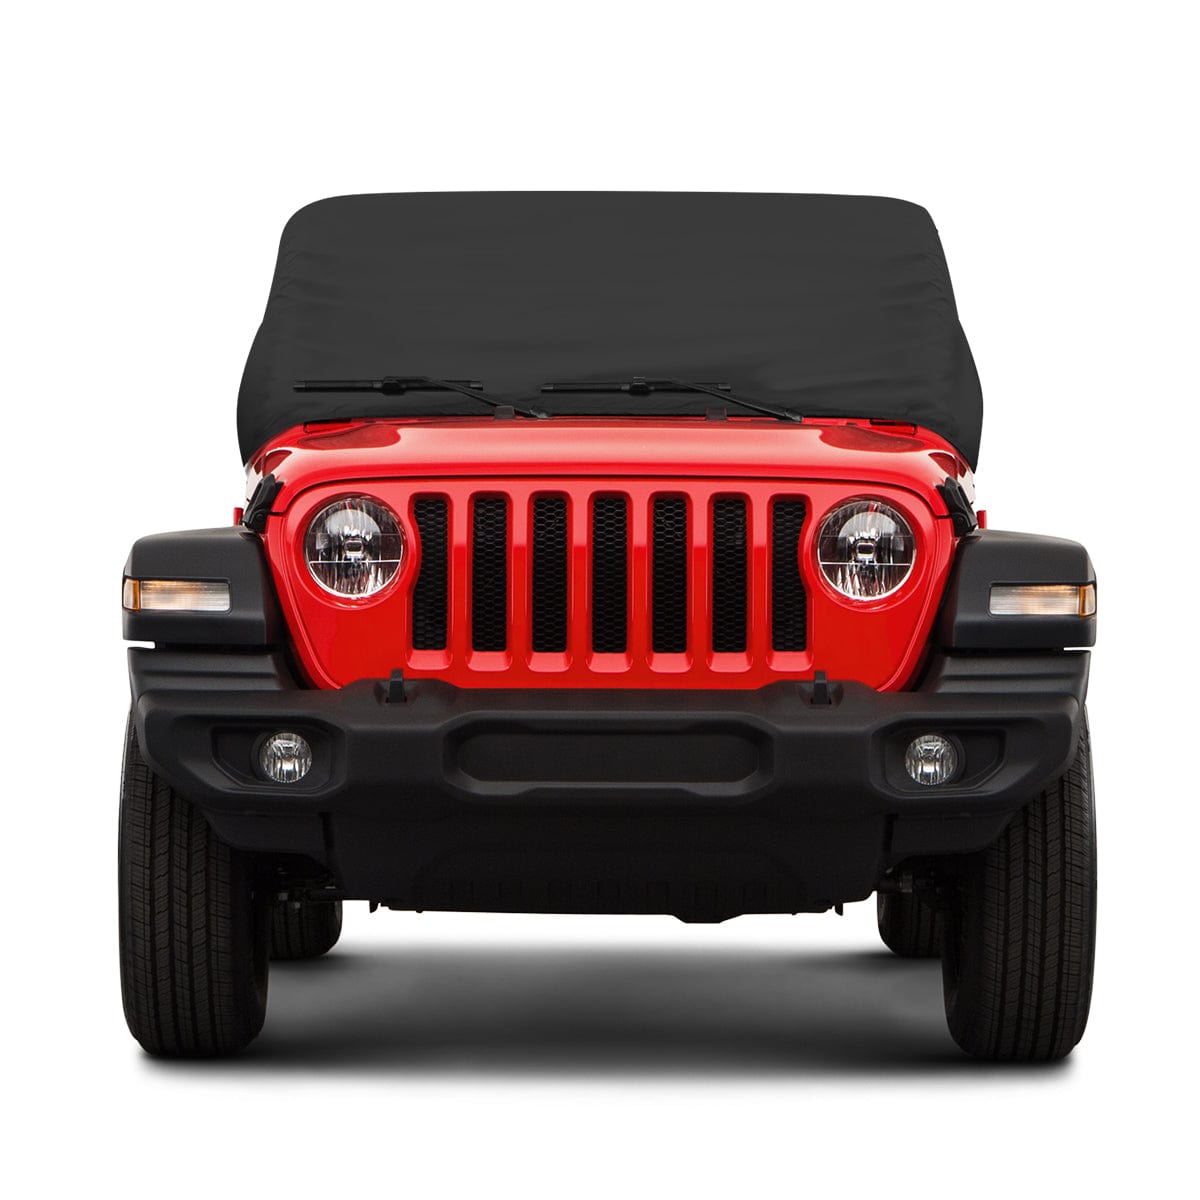 SUPAREE Jeep Cover Suparee Jeep Gladiator Cab Cover All Protection for 2020-2022 JT 4 Door Product description